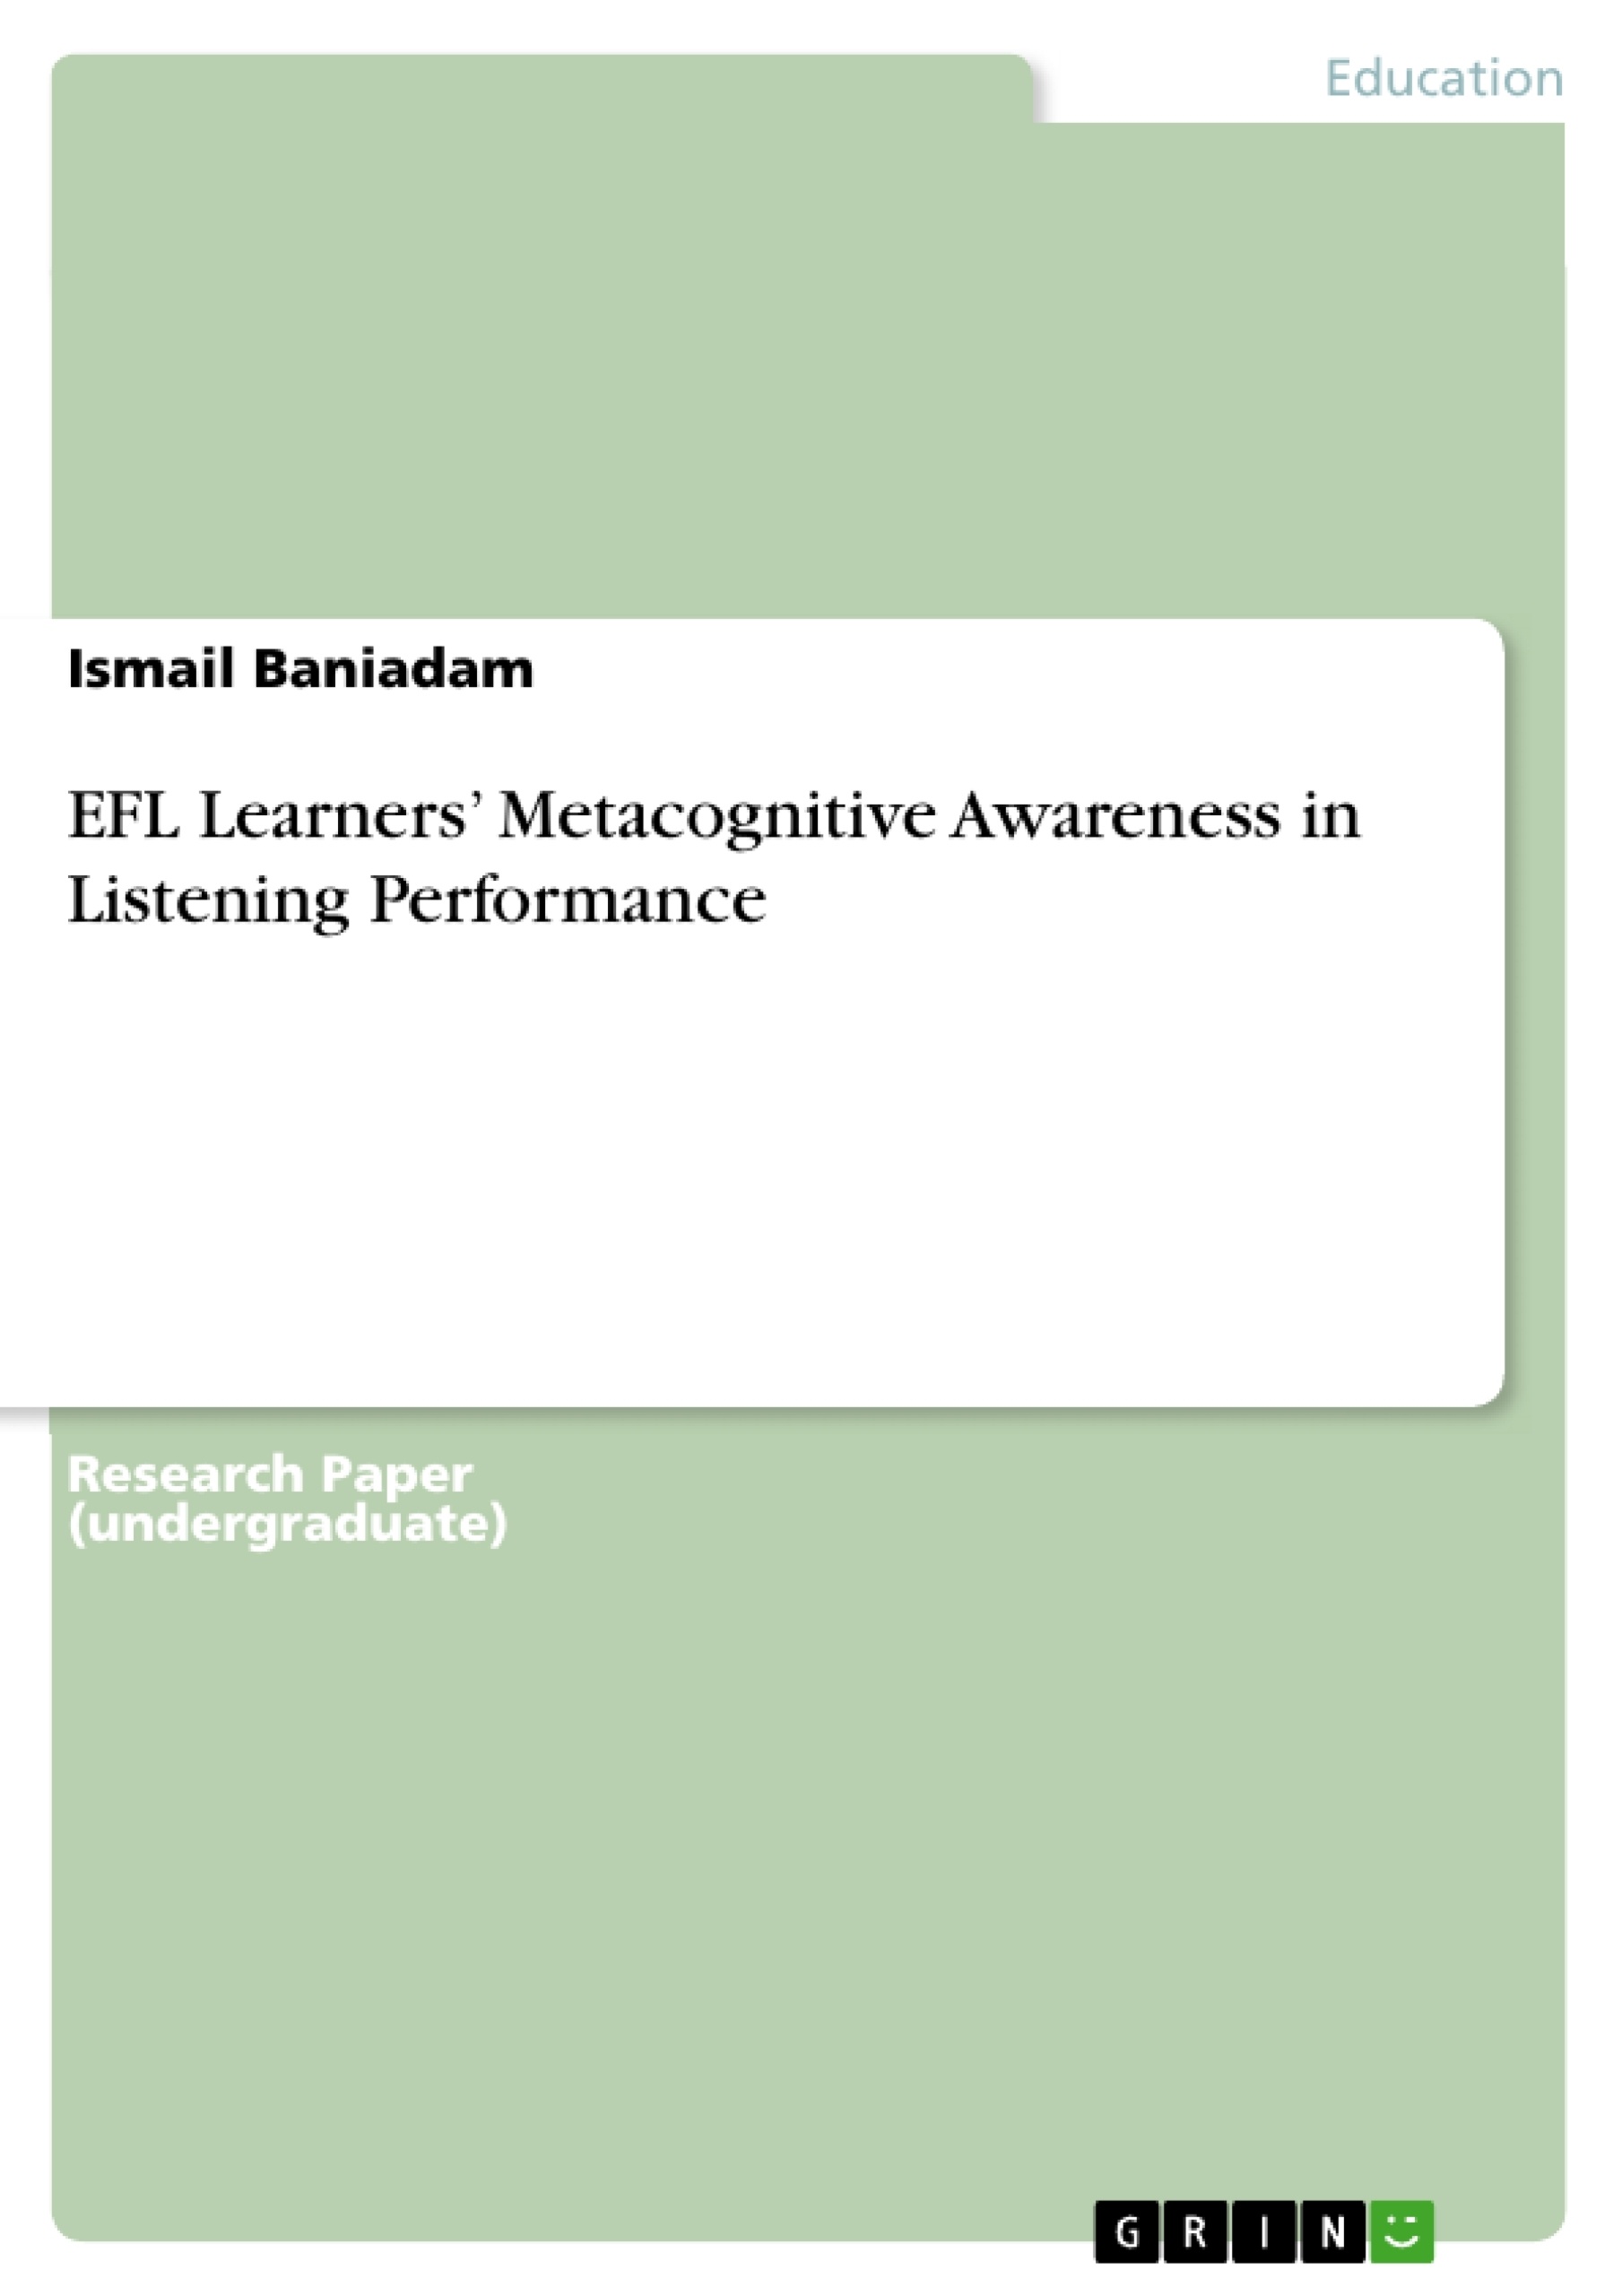 Título: EFL Learners’ Metacognitive Awareness in Listening Performance